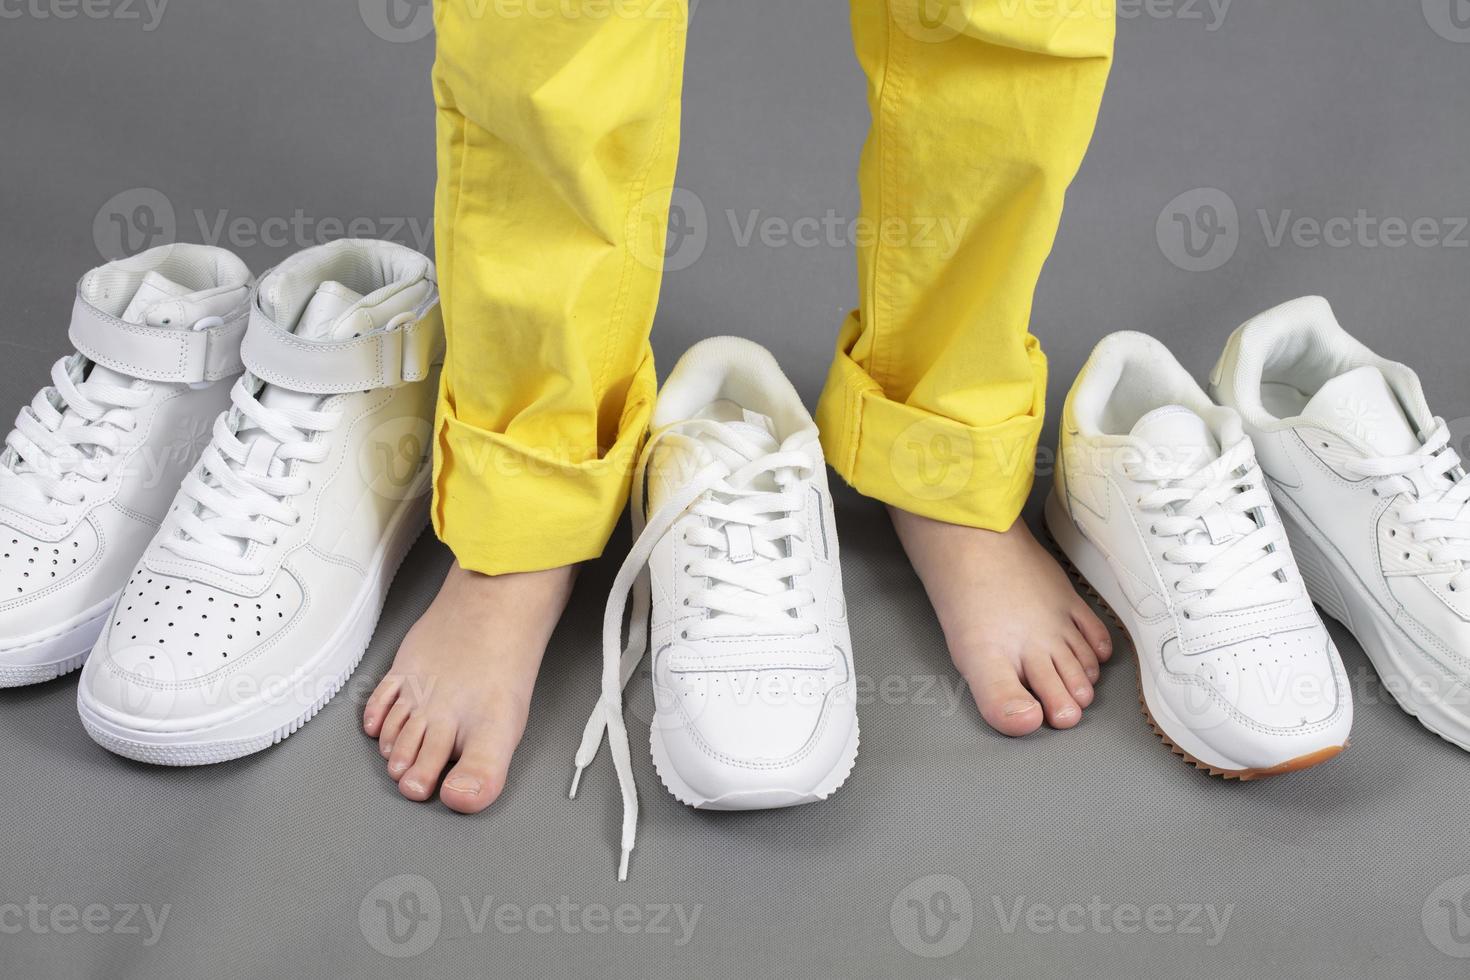 Barefoot on the background of shoes. Feet in a pile of shoes. Children's foot on the background of sneakers. Foot and shoes photo